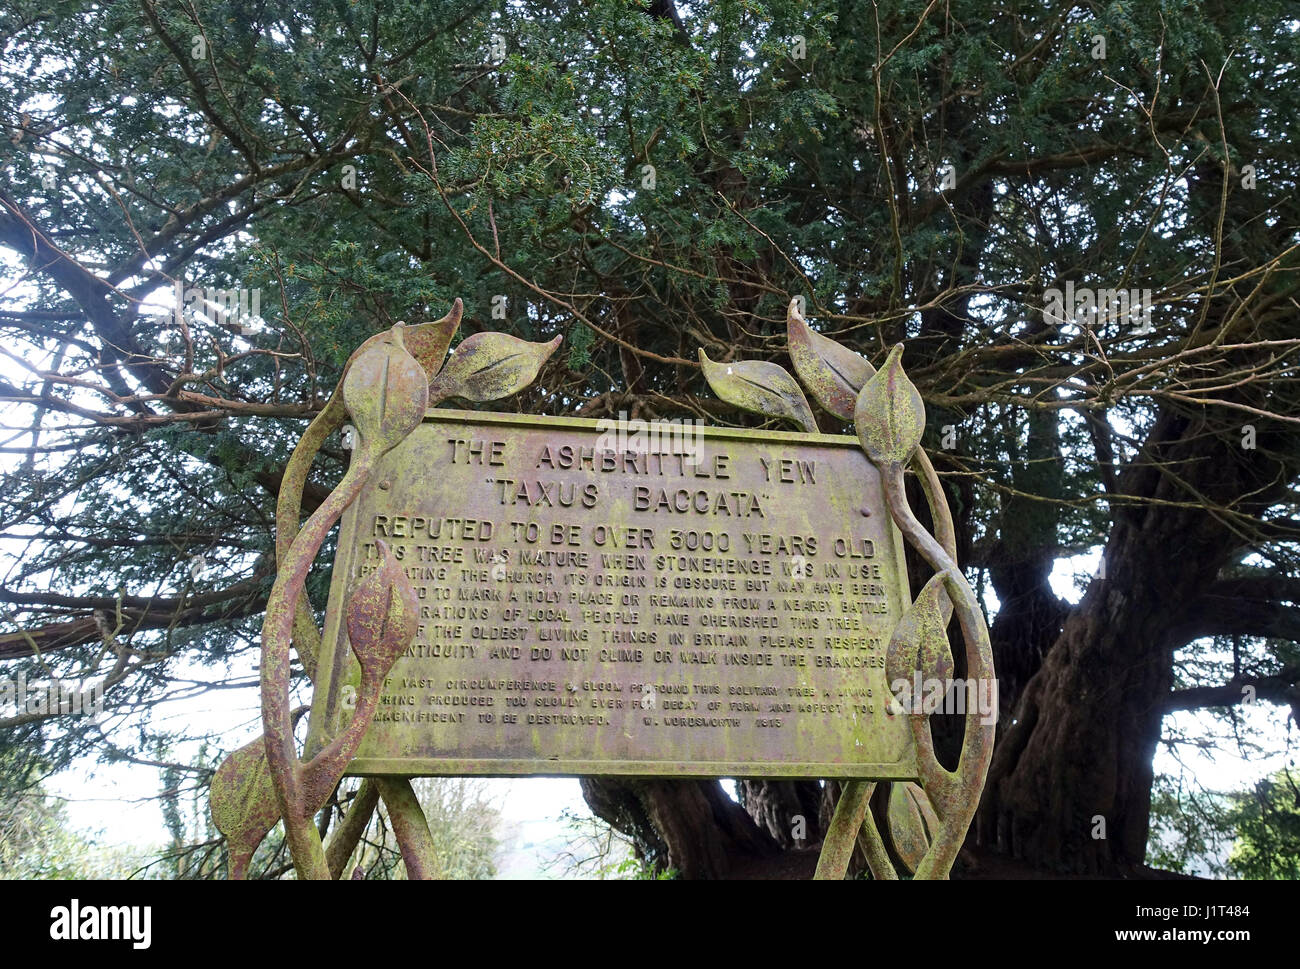 The Ashbrittle Yew in Ashbrittle, Somerset is thought to be over 3,000 years old Stock Photo